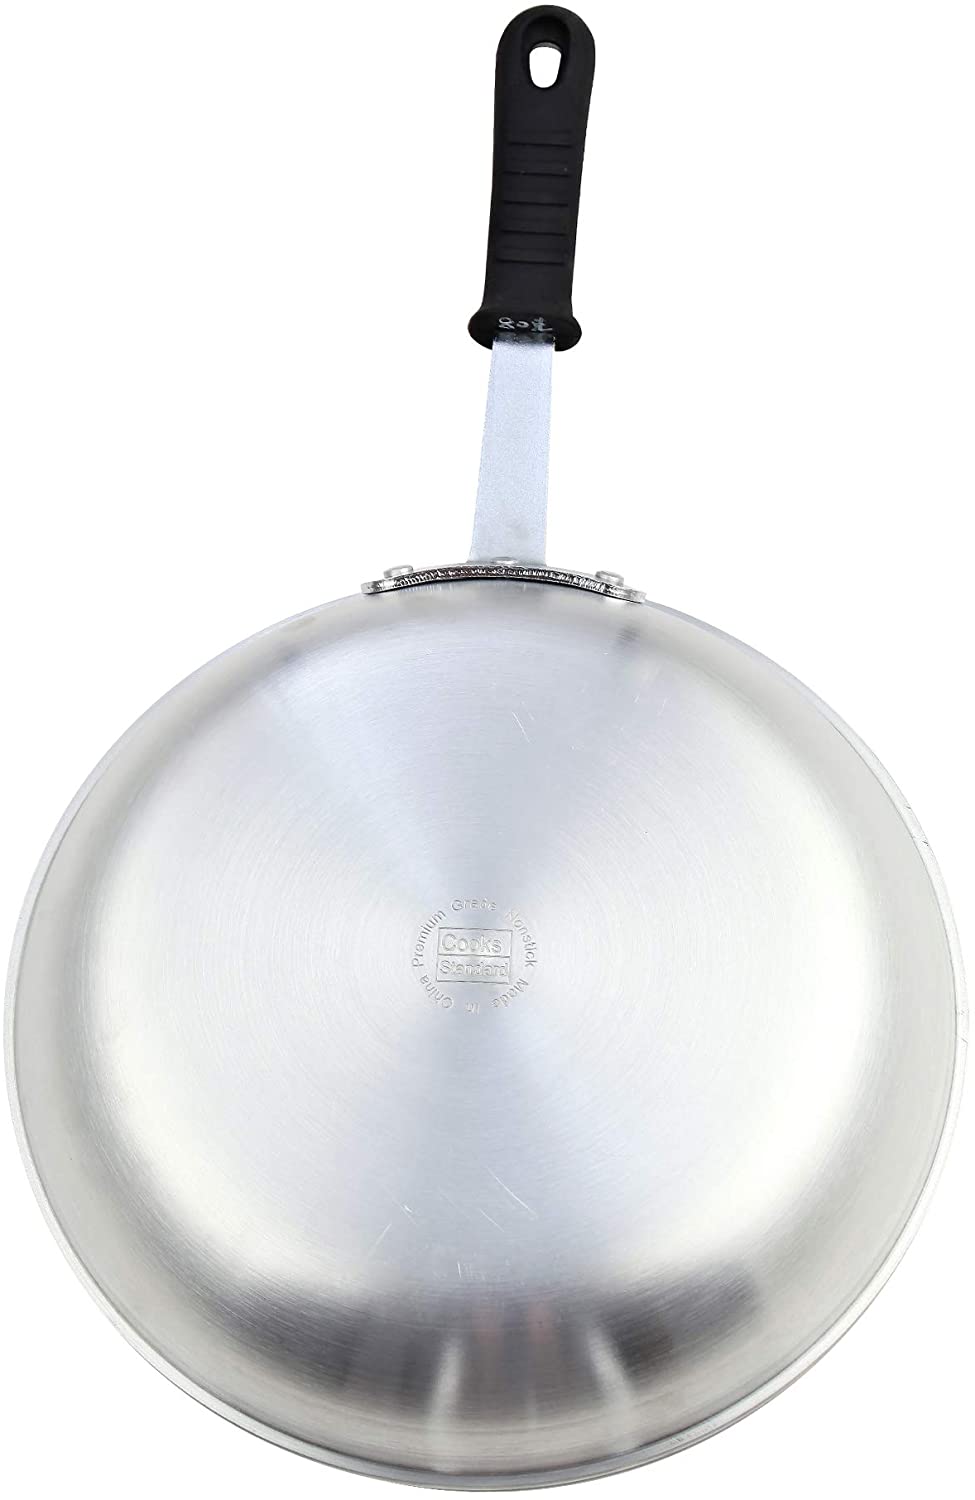 Cooks Standard 10-Inch Durable Heavy Duty Professional Aluminum